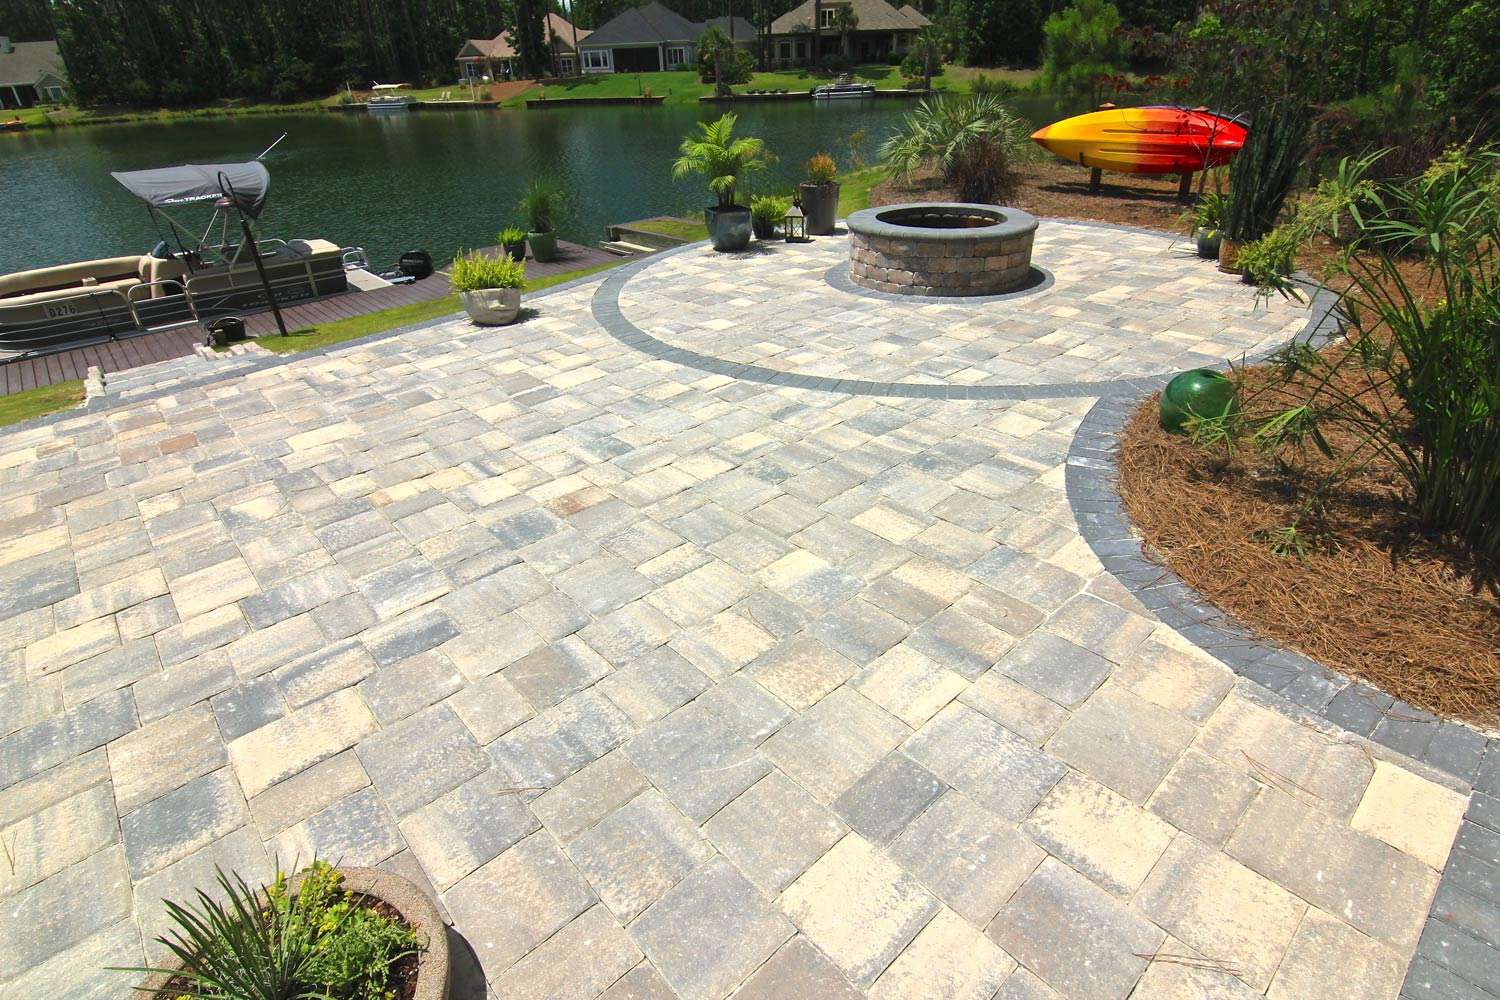 How To Build A Paver Patio On Sloped Yard